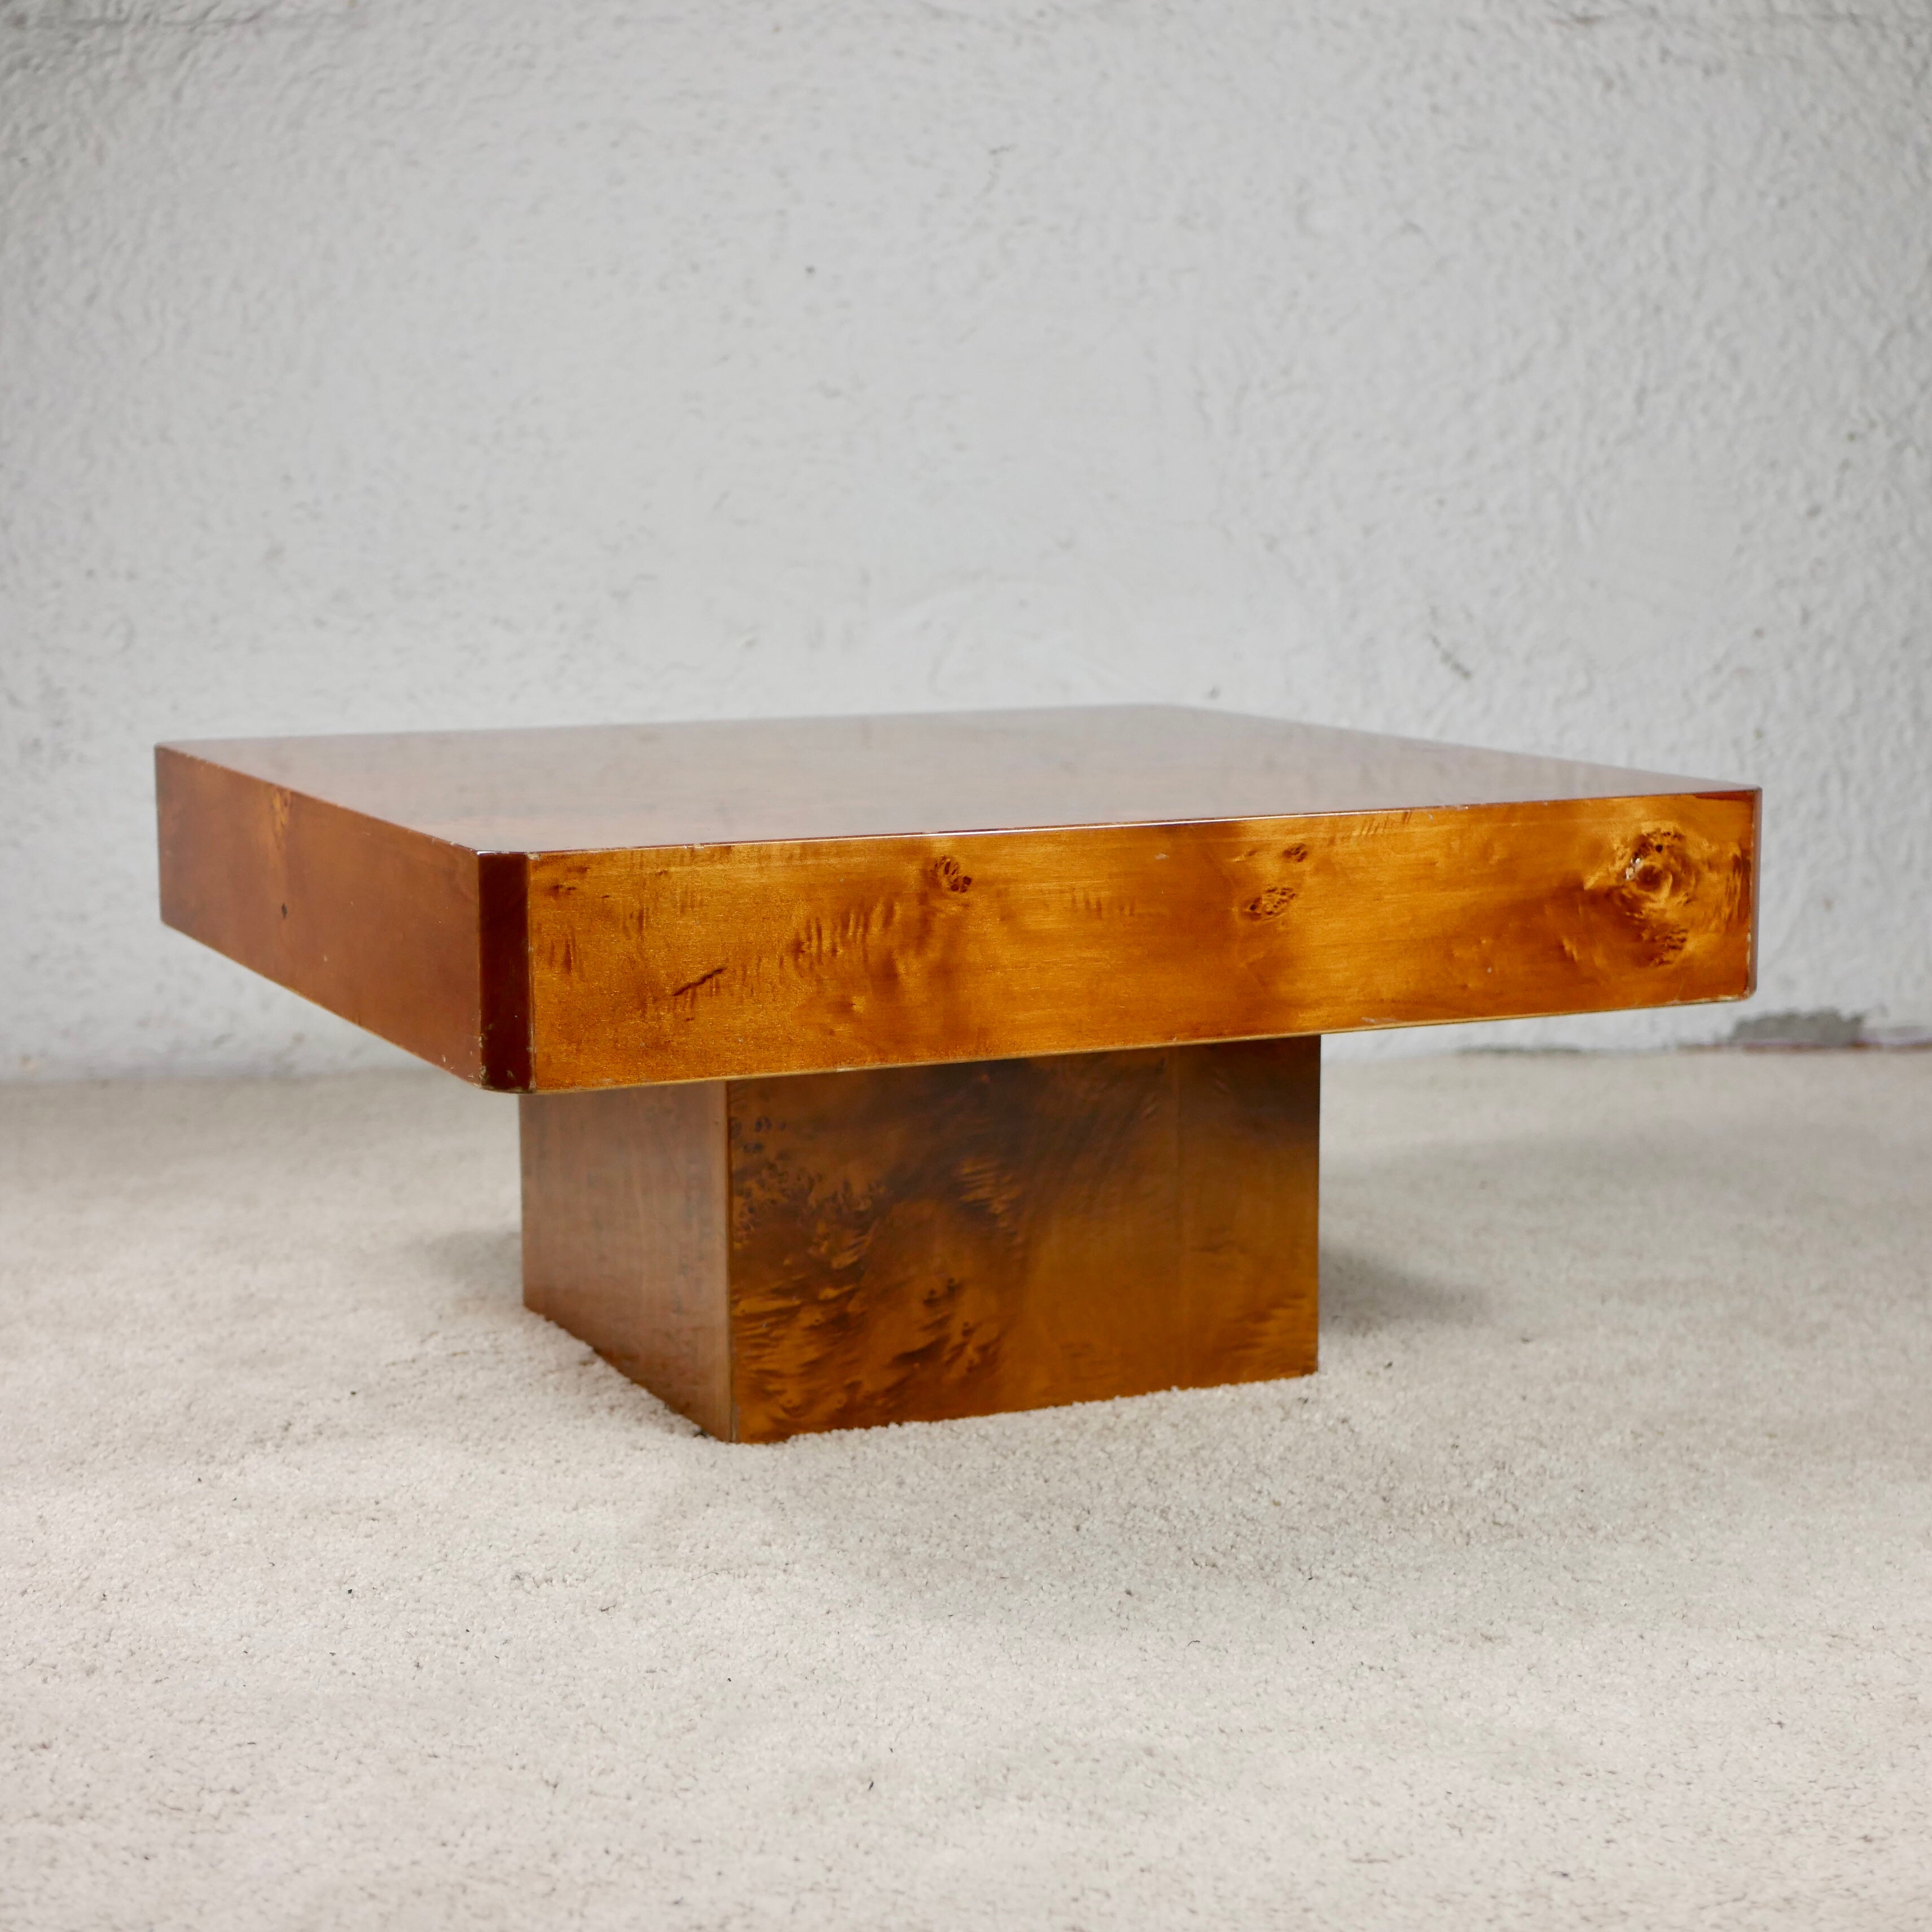 Beautiful elm burl wood coffee table made in France, by Roche Bobois, from the 1980s.
Really stunning!
Lightweight and easy to fit in any interior.
Good overall condition, light traces on the varnish.
Dimensions : Sides 70cm, height 30cm.